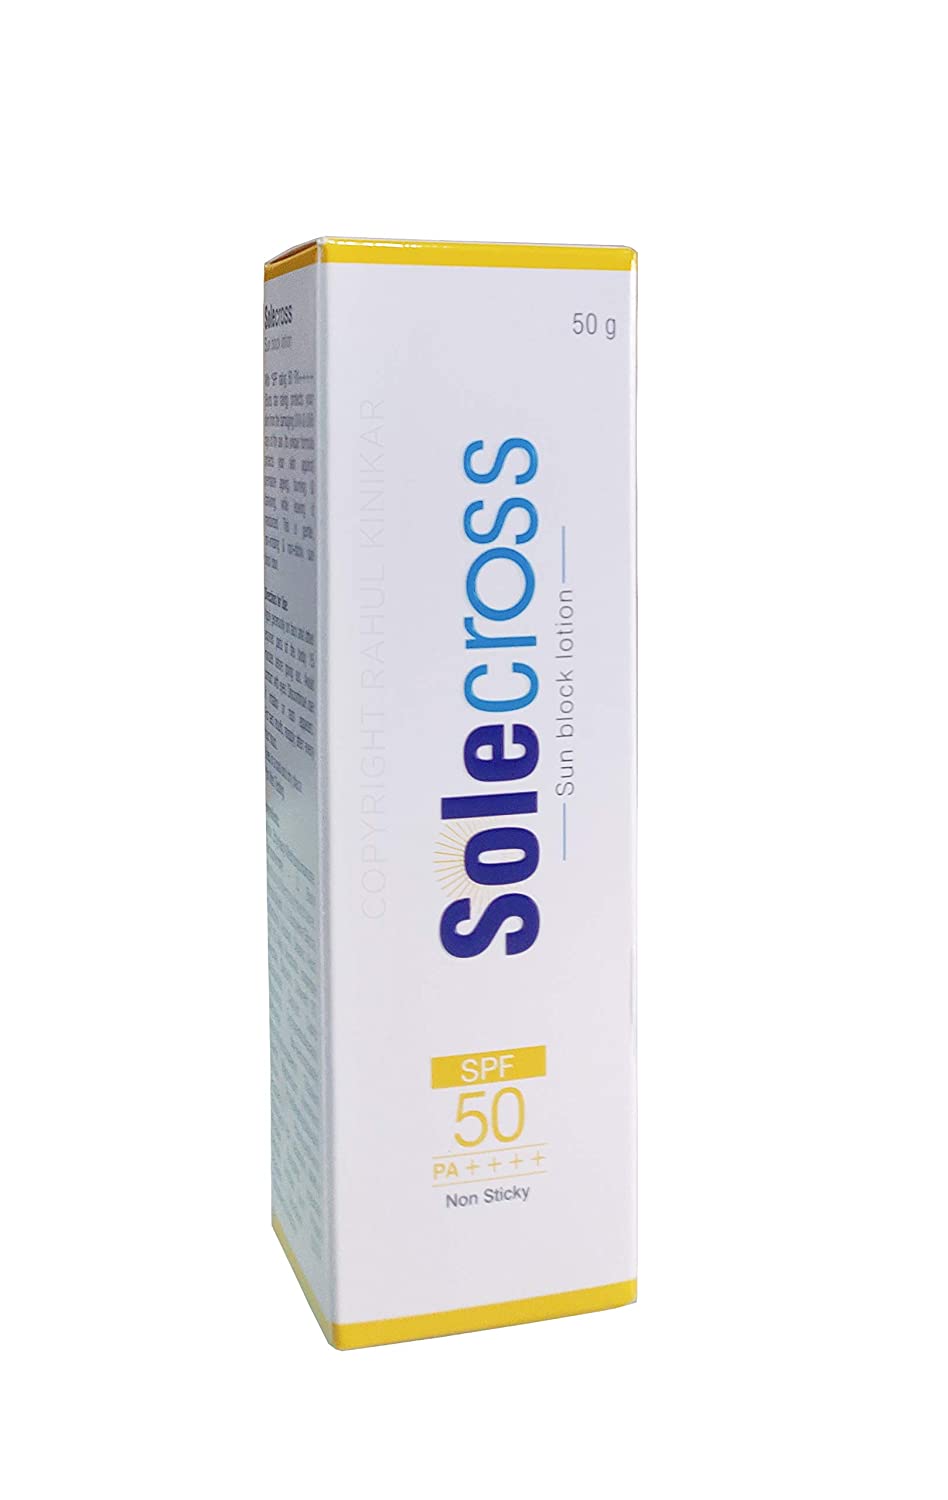 SOLECROSS Sun Block Sunscreen Lotion SPF 50 PA++++ Non Sticky 50Gm - Skinluv.in